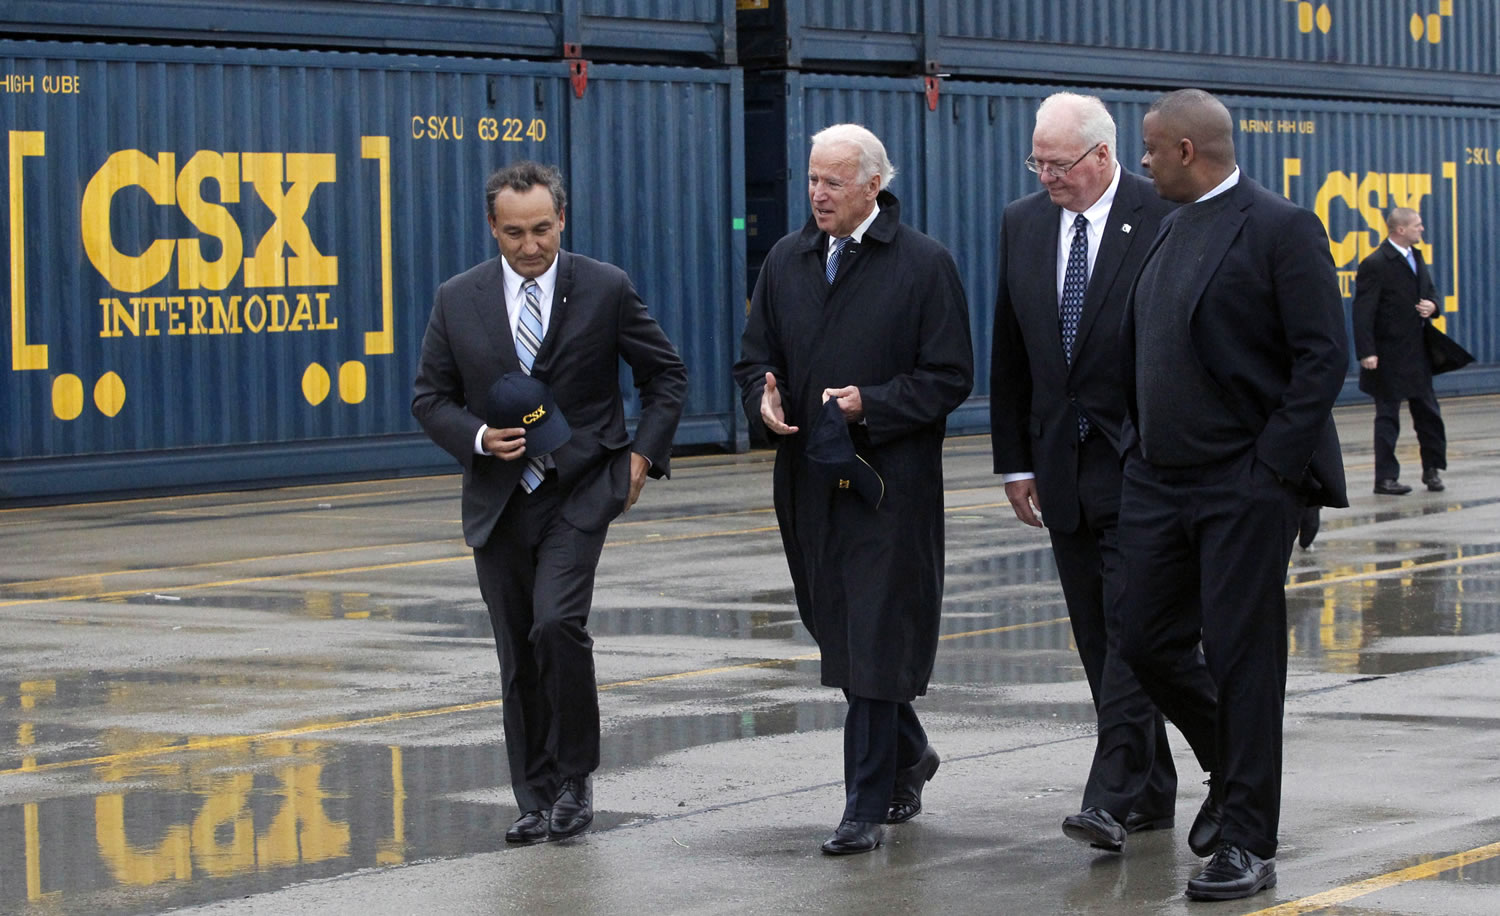 Oscar Munoz, then-chief operating officer and executive vice president of CSX Corporation, from left, Vice President Joe Biden, Wilby Whitt, CSX Intermodal Terminals Inc. president, and Secretary of Transportation Anthony Foxx tour the CSX facility in North Baltimore, Ohio. Munoz, the new CEO of United Airlines faces a daunting list of problems he must fix, including late flights and technology that too often suffers embarrassing outages. (Amy E.